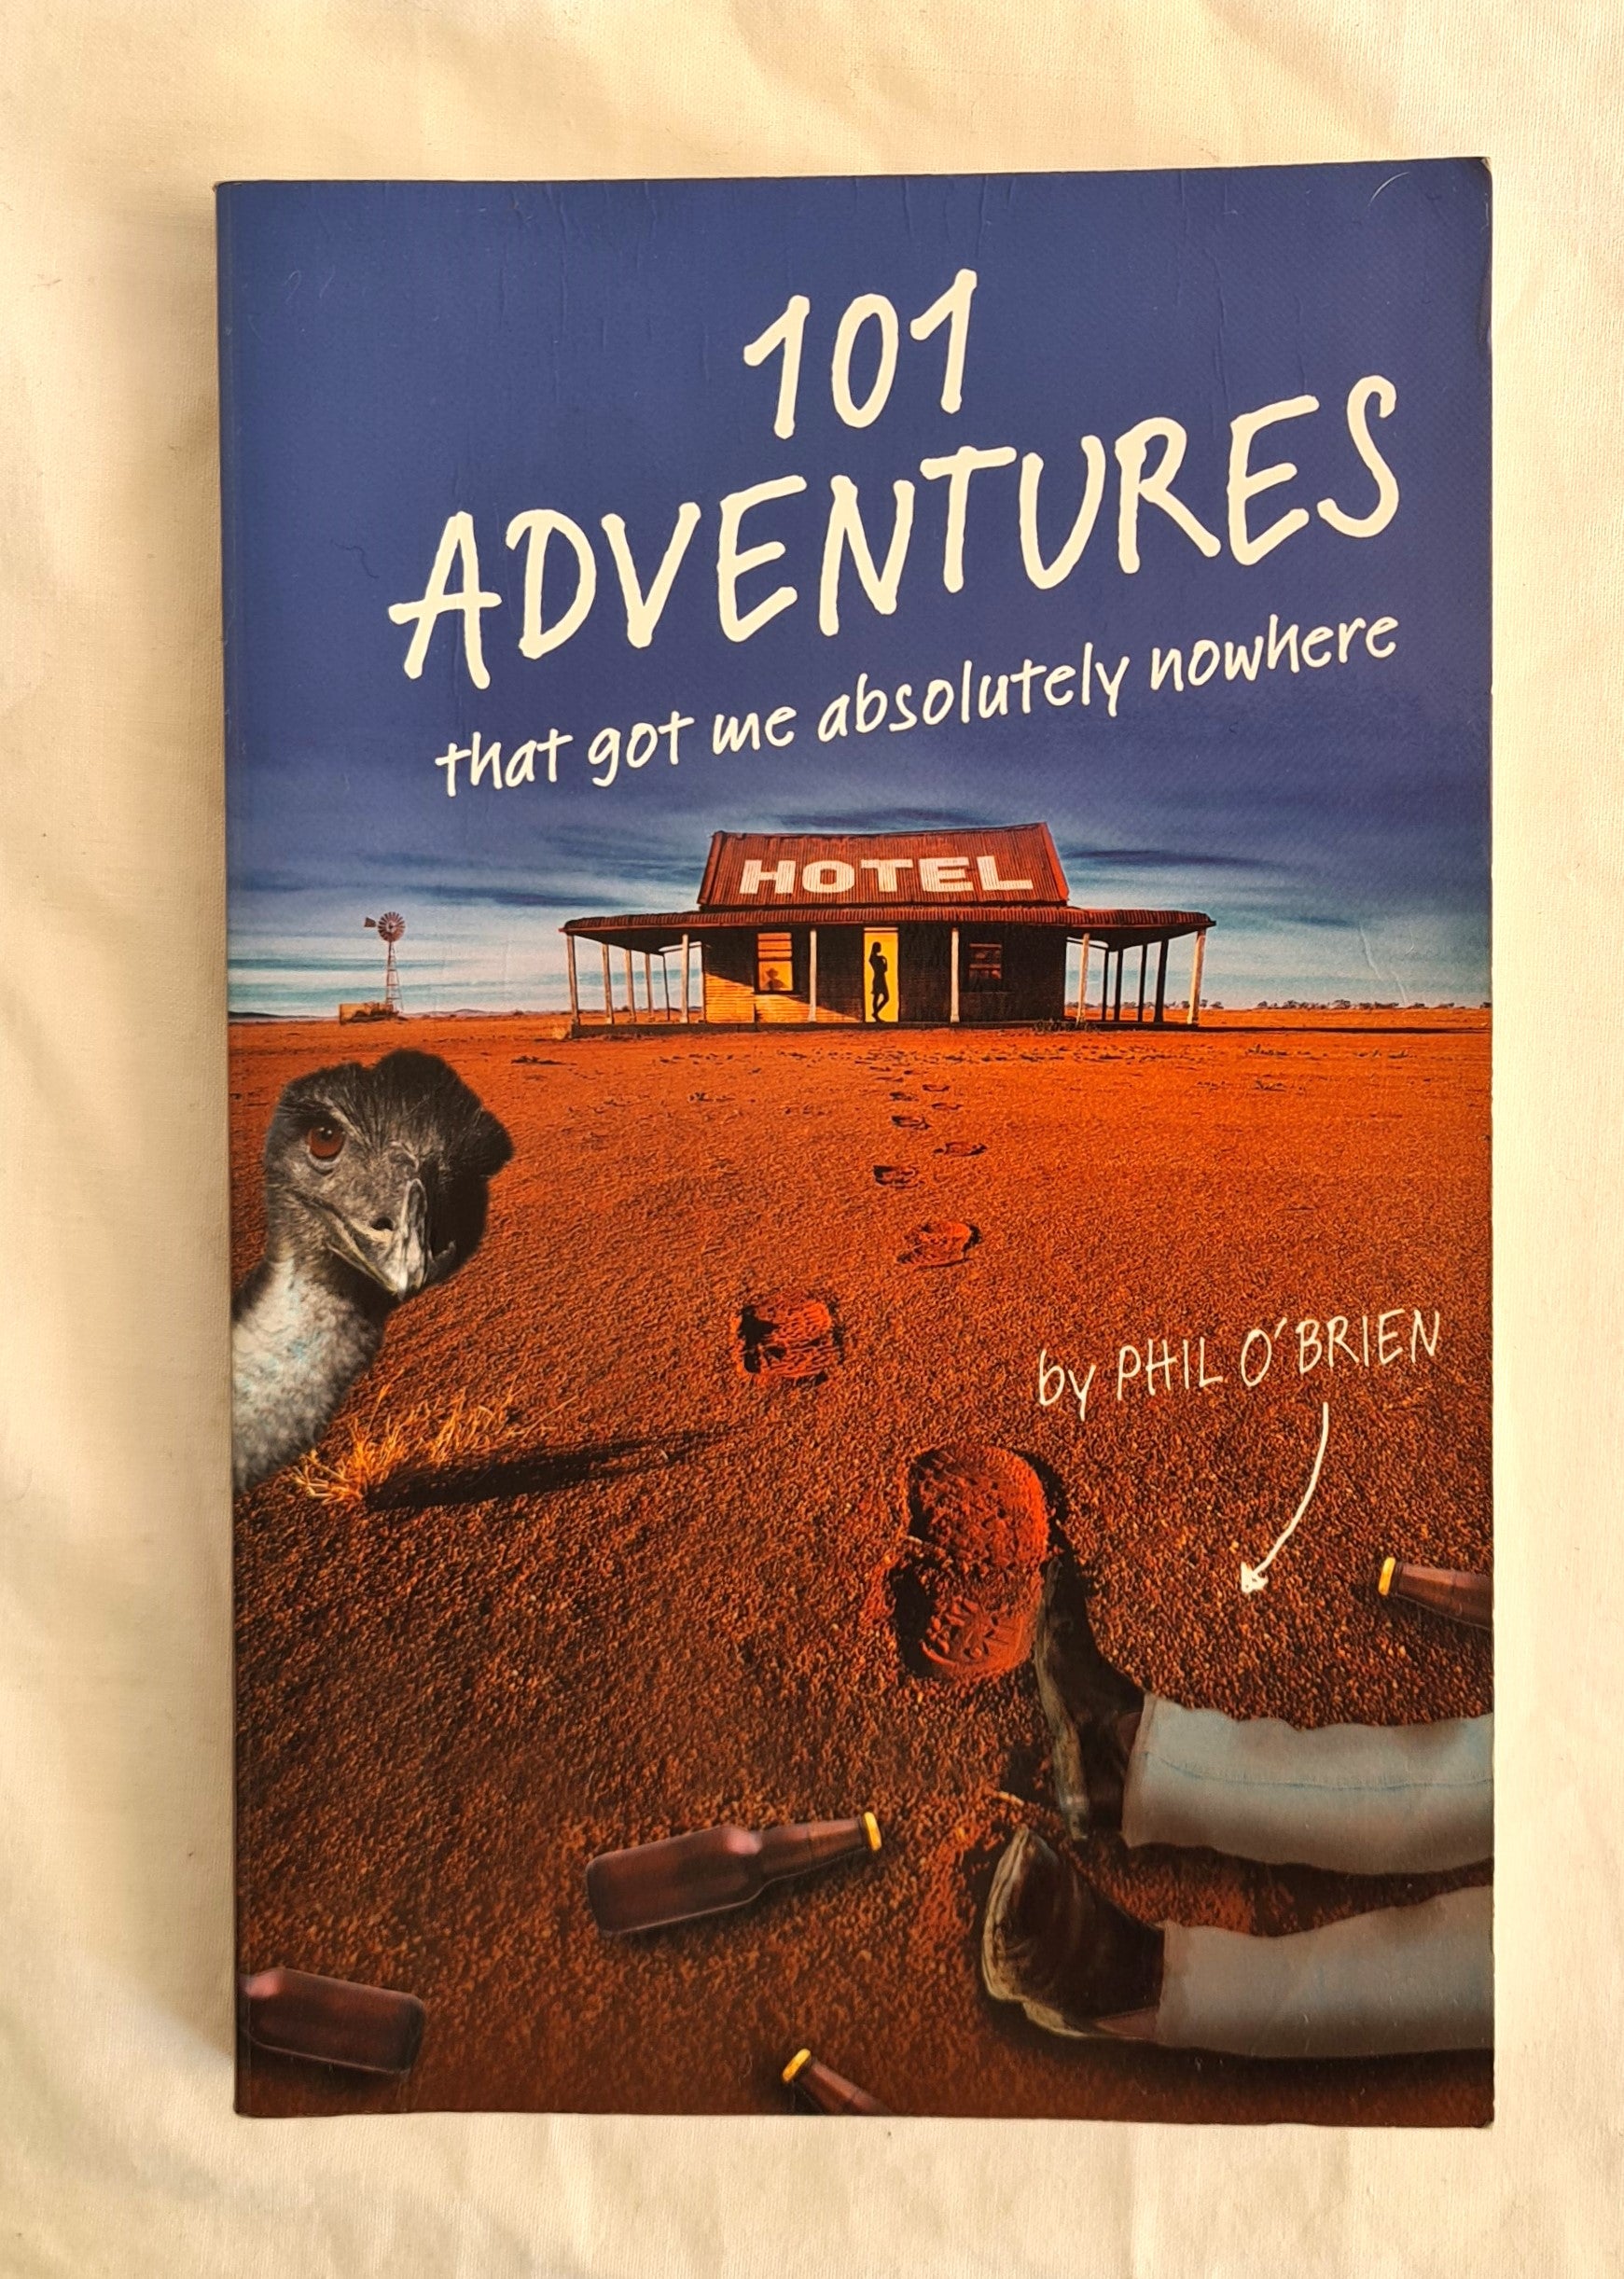 101 Adventures that Got Me Absolutely Nowhere by Phil O’Brien